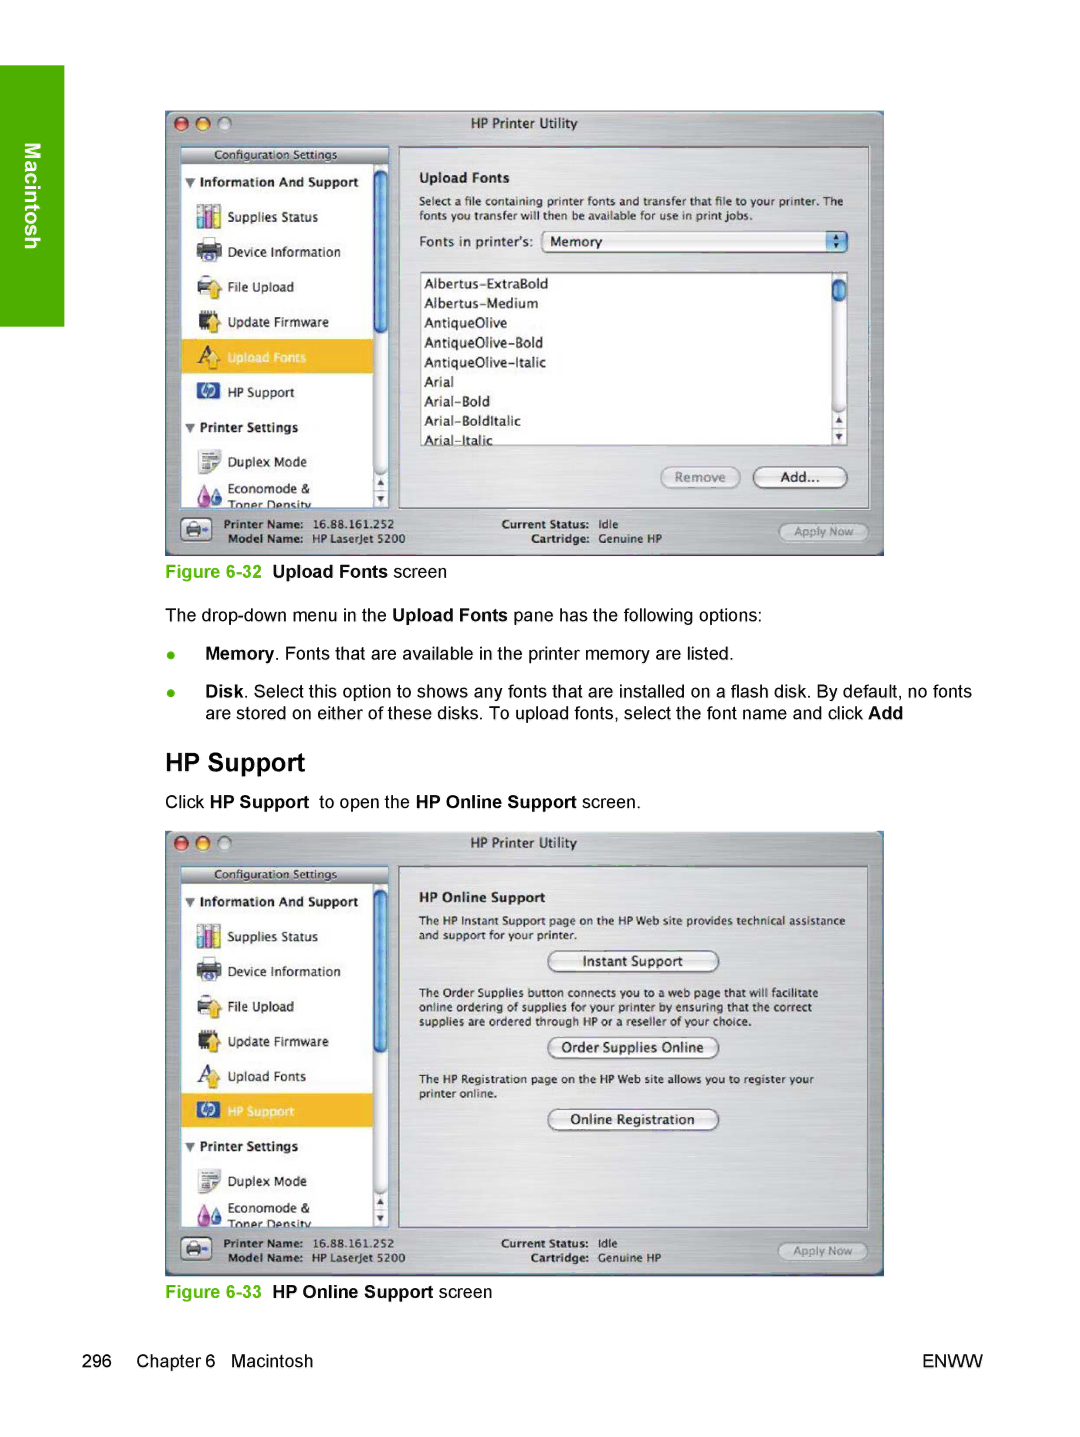 HP 5200L manual Click HP Support to open the HP Online Support screen 